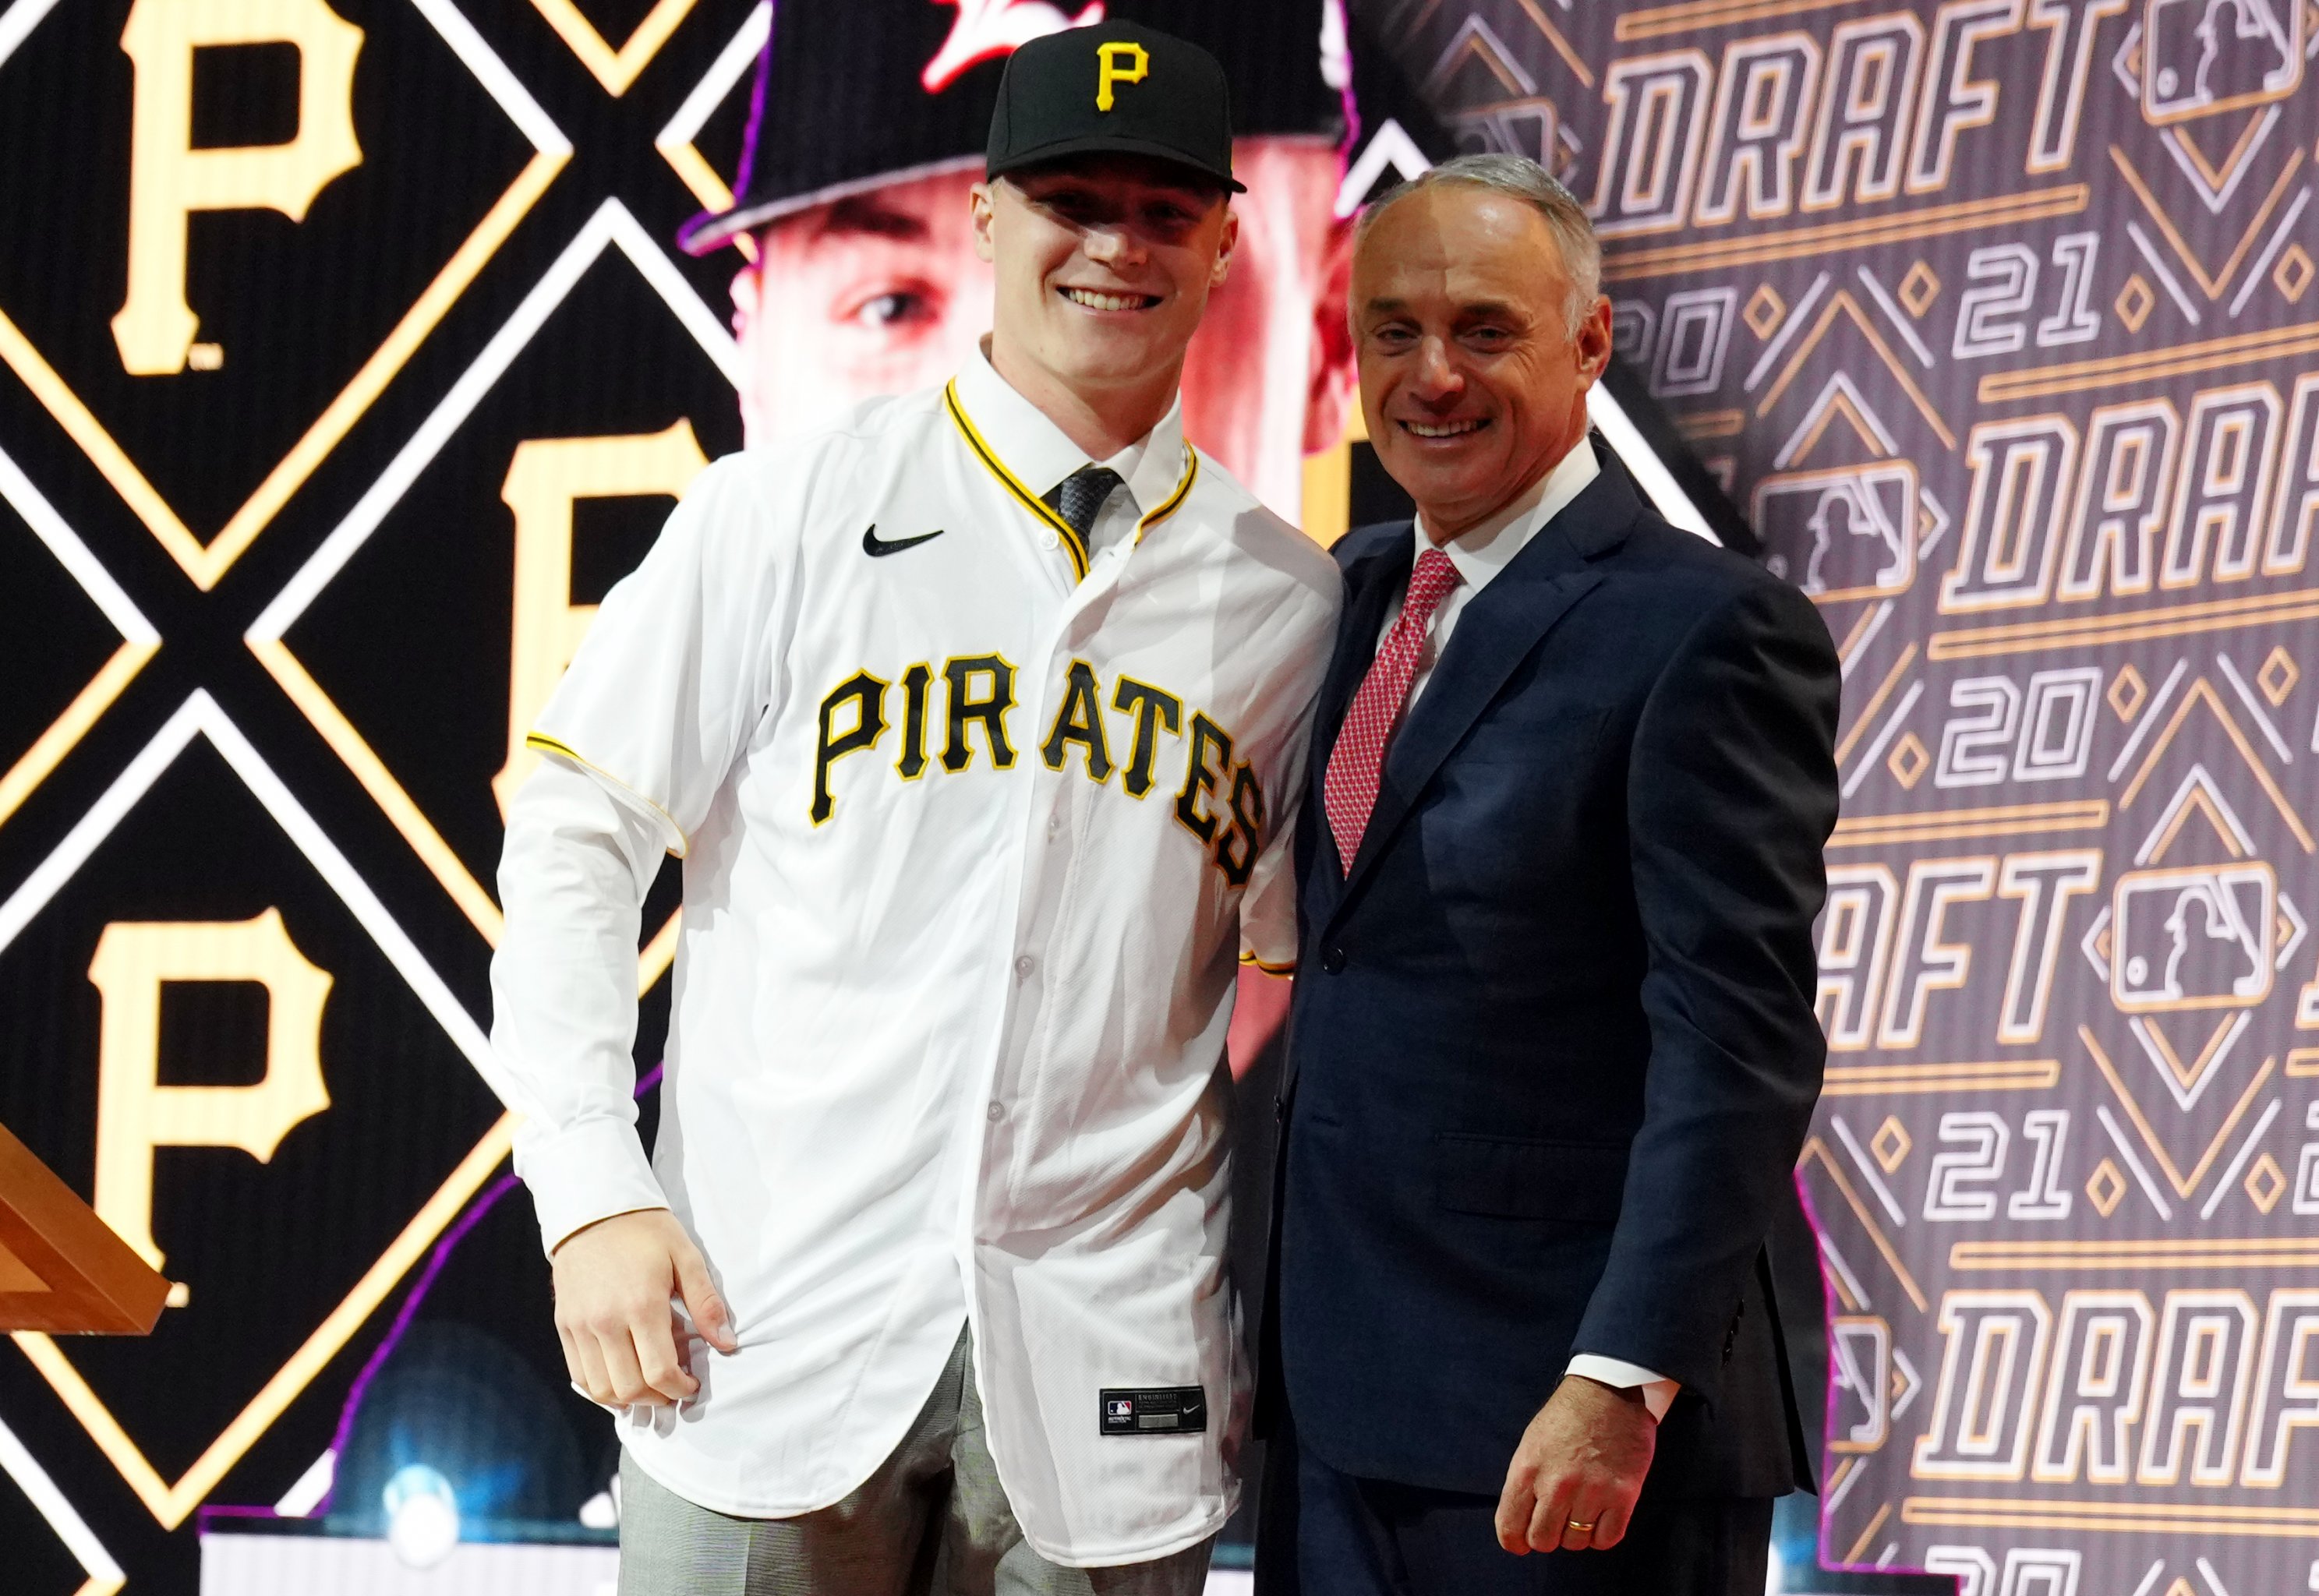 Miami Marlins select Cody Morissette No. 52 Overall in 2021 MLB Draft